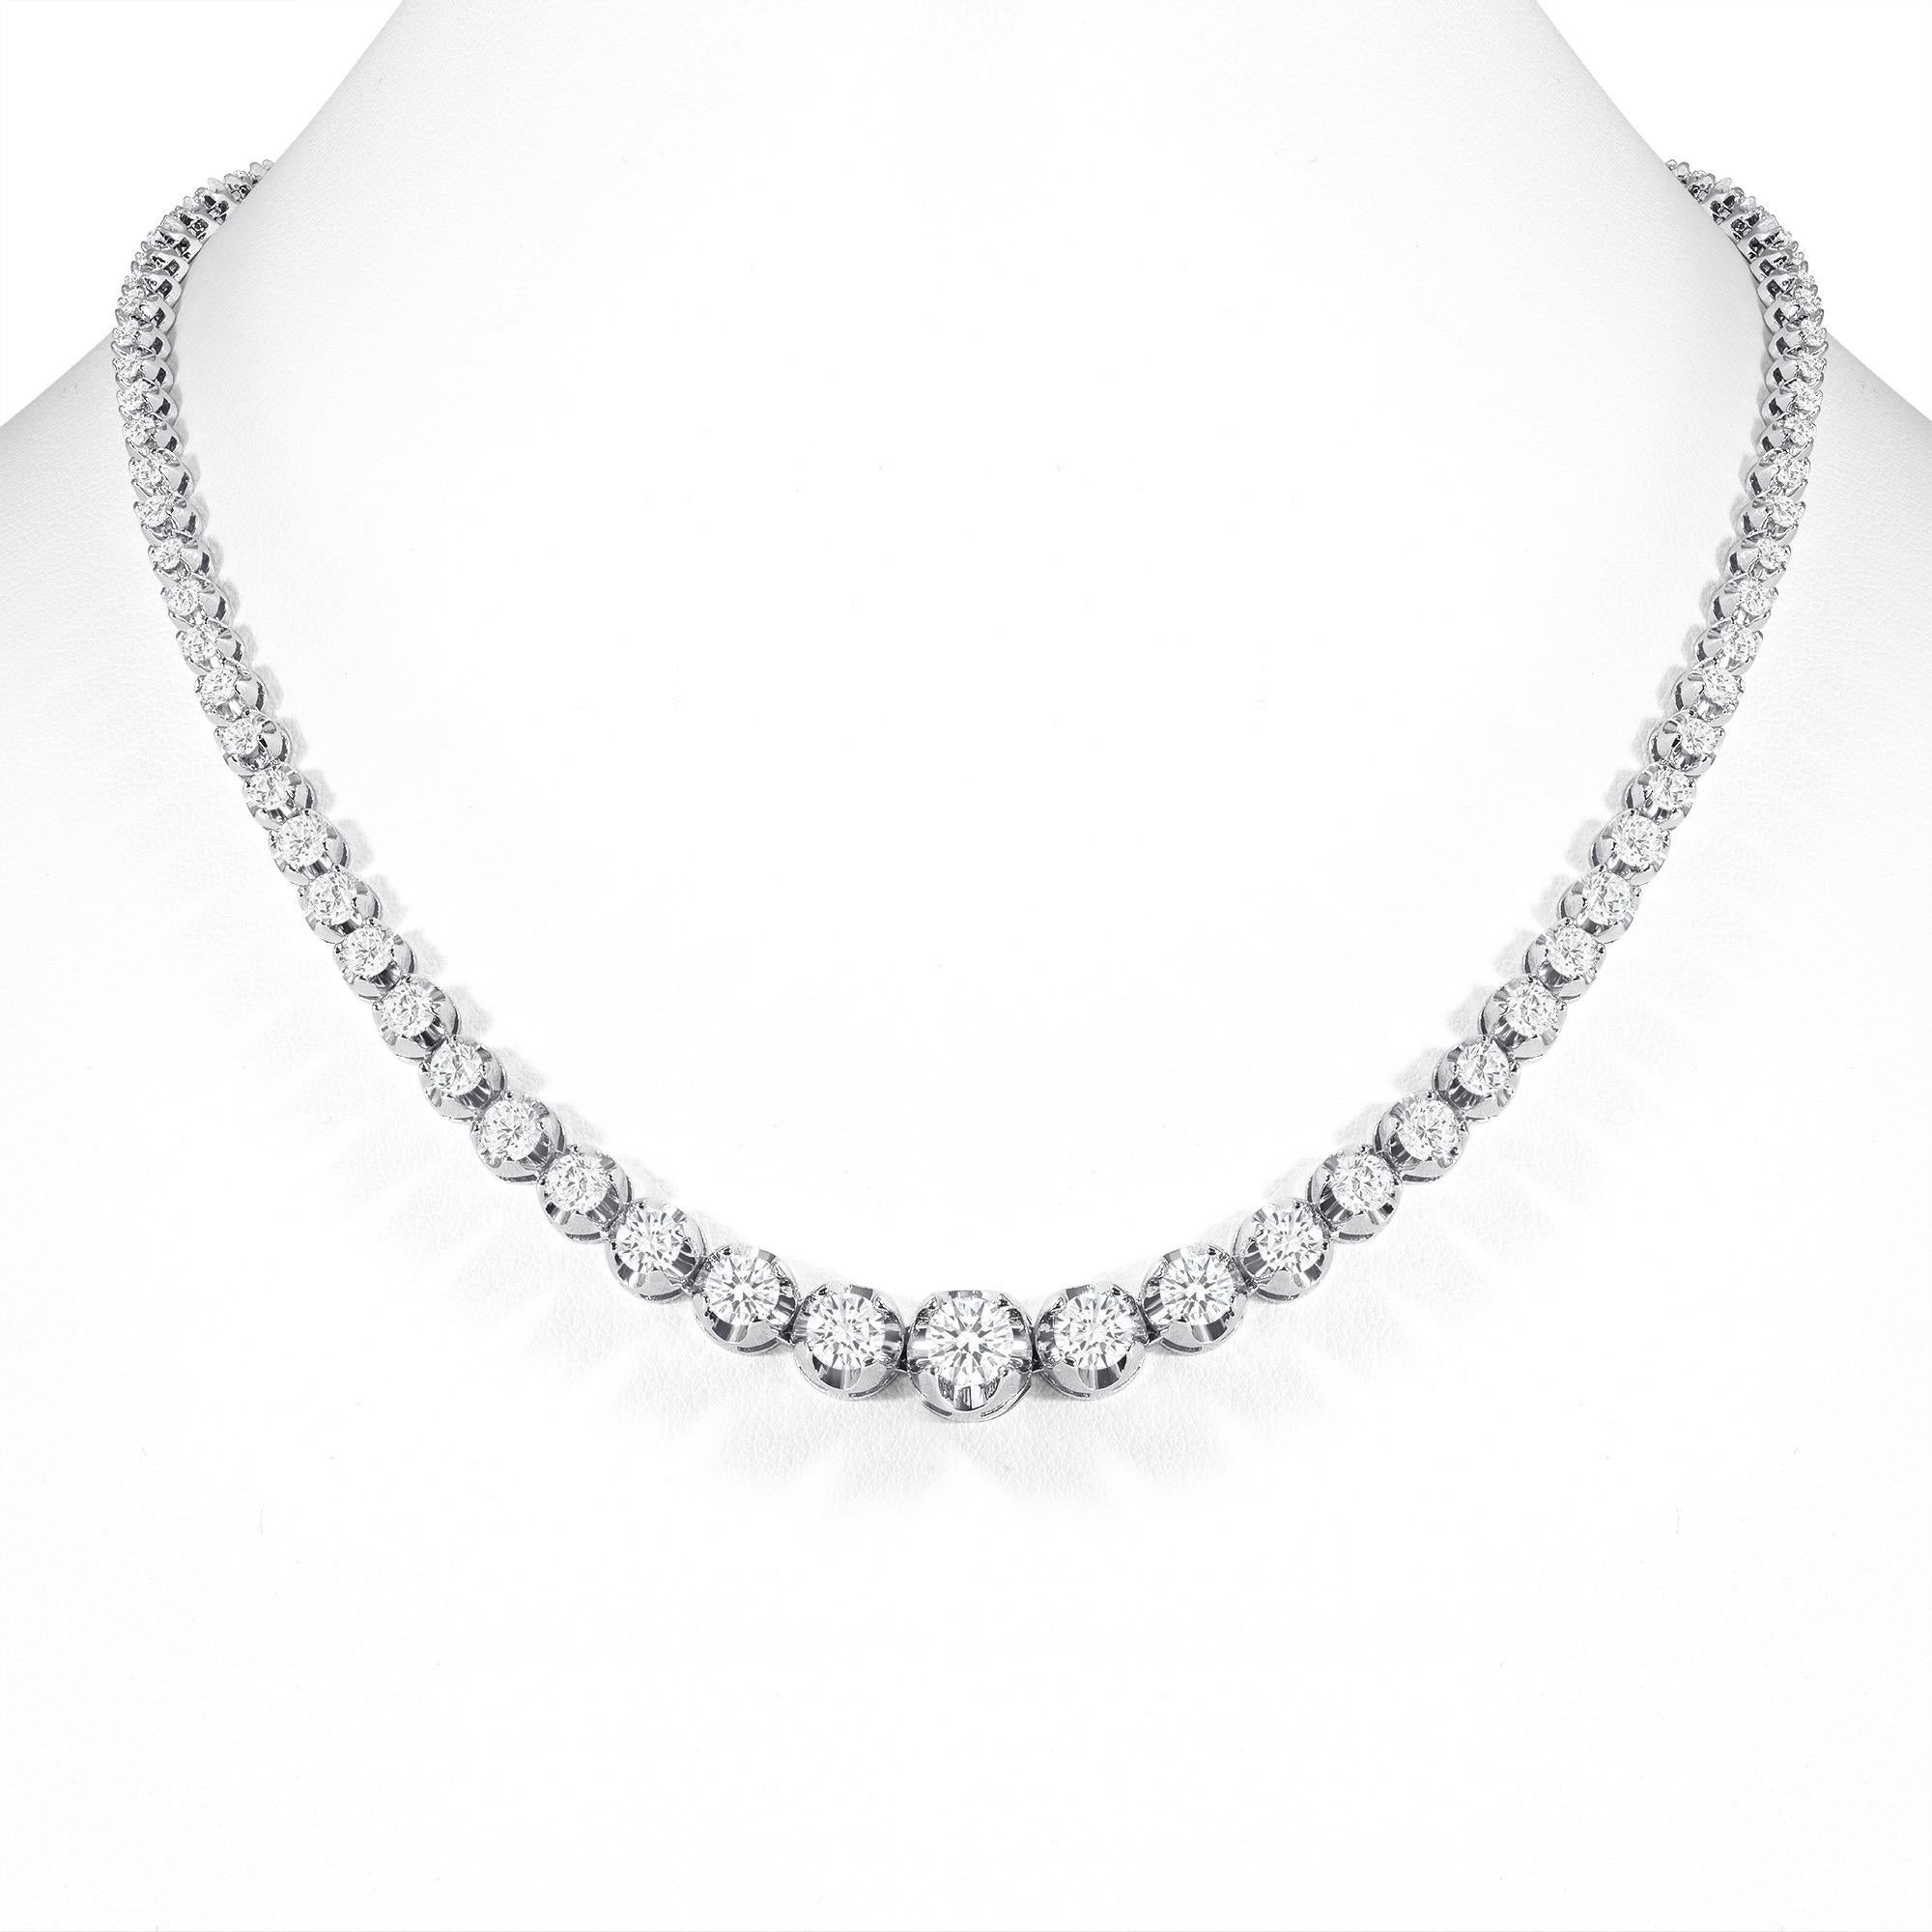 This finely made graduated necklace with beautiful round diamonds sits elegantly on any neck. 

Metal: 14k Gold
Diamond Cut: Round Natural Diamond (not lab grown or moissanite)
Total Diamond Approx. Carats: 5ct
Diamond Clarity: VS
Diamond Color: